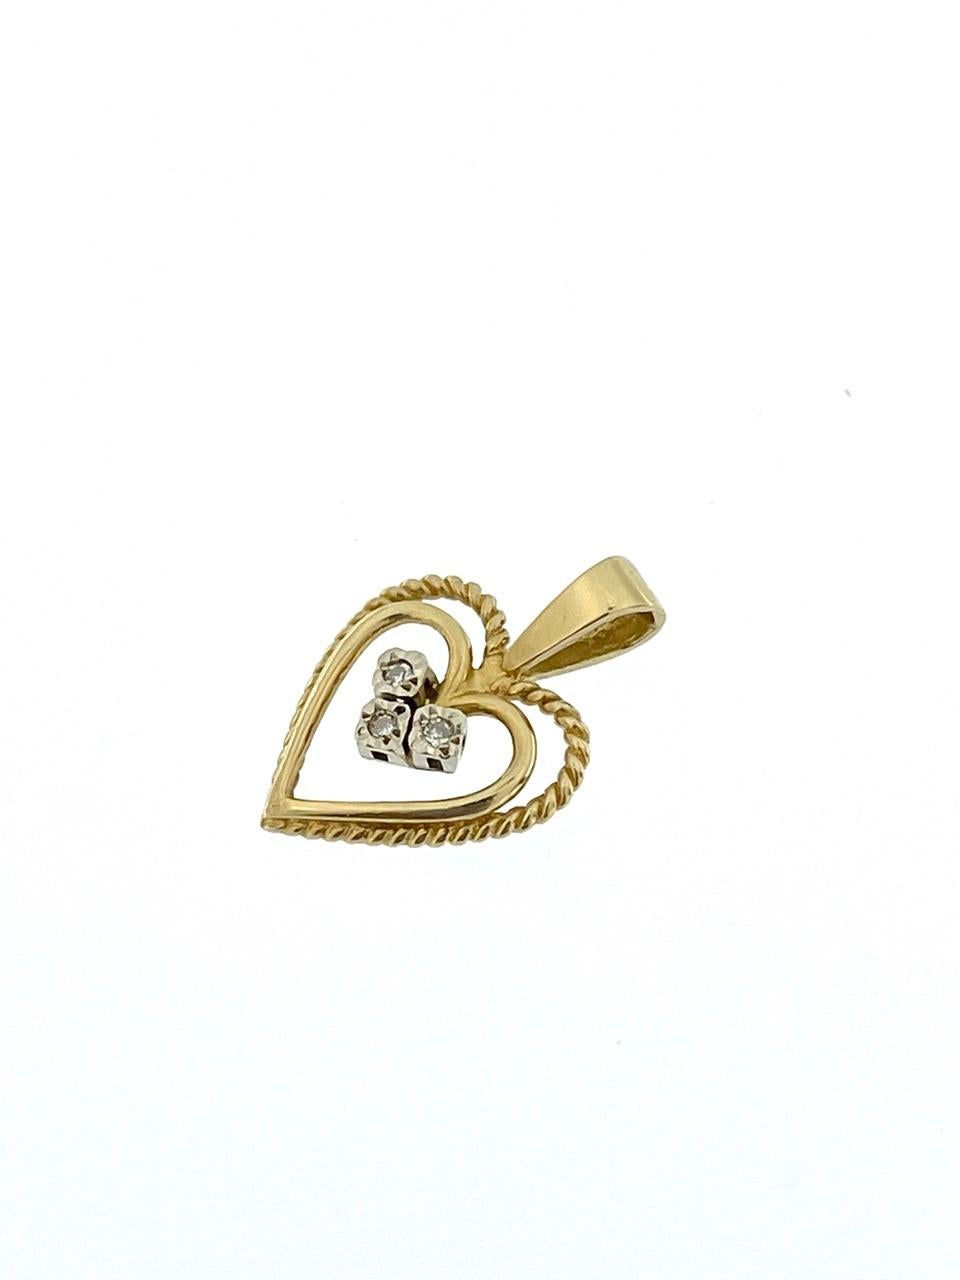 The Spanish Double Heart Pendant in Yellow and White Gold with Diamonds is a romantic piece of jewelry that showcases intricate craftsmanship and elegance. Crafted from 18-karat yellow and white gold, this pendant features a unique design with two